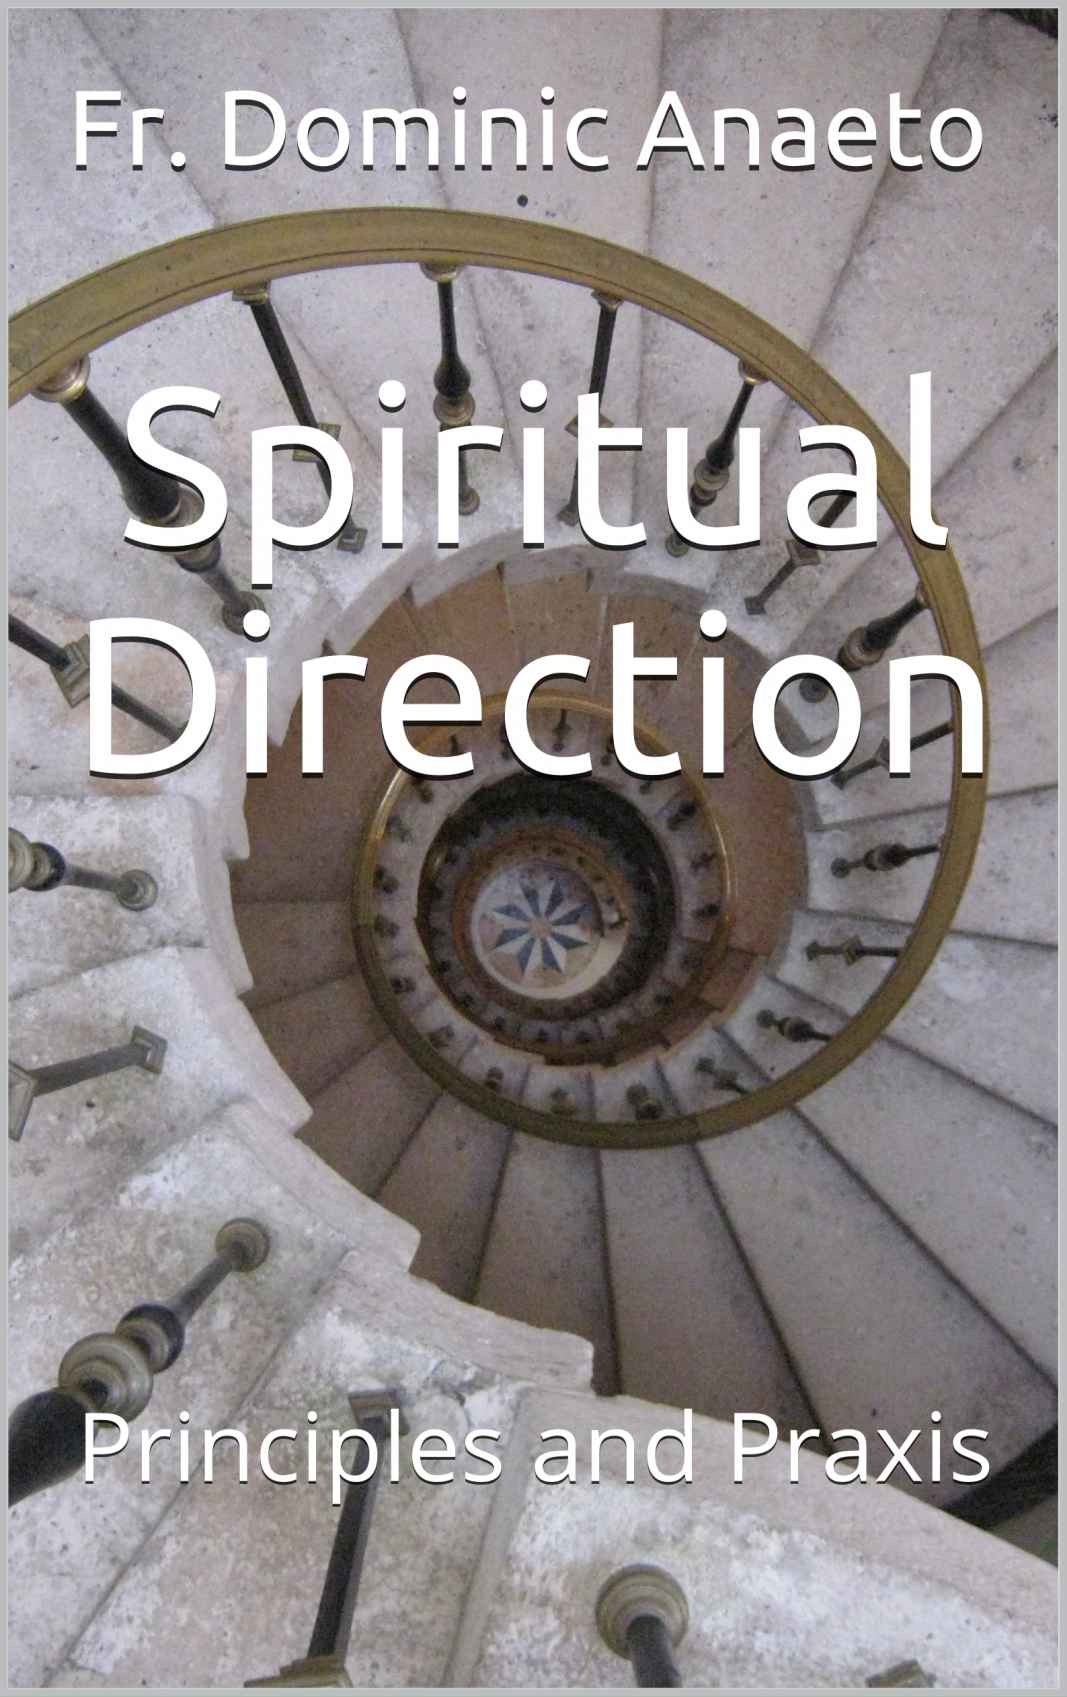 Spiritual Direction: Principles and Praxis, authored by Fr. Dominic Anaeto